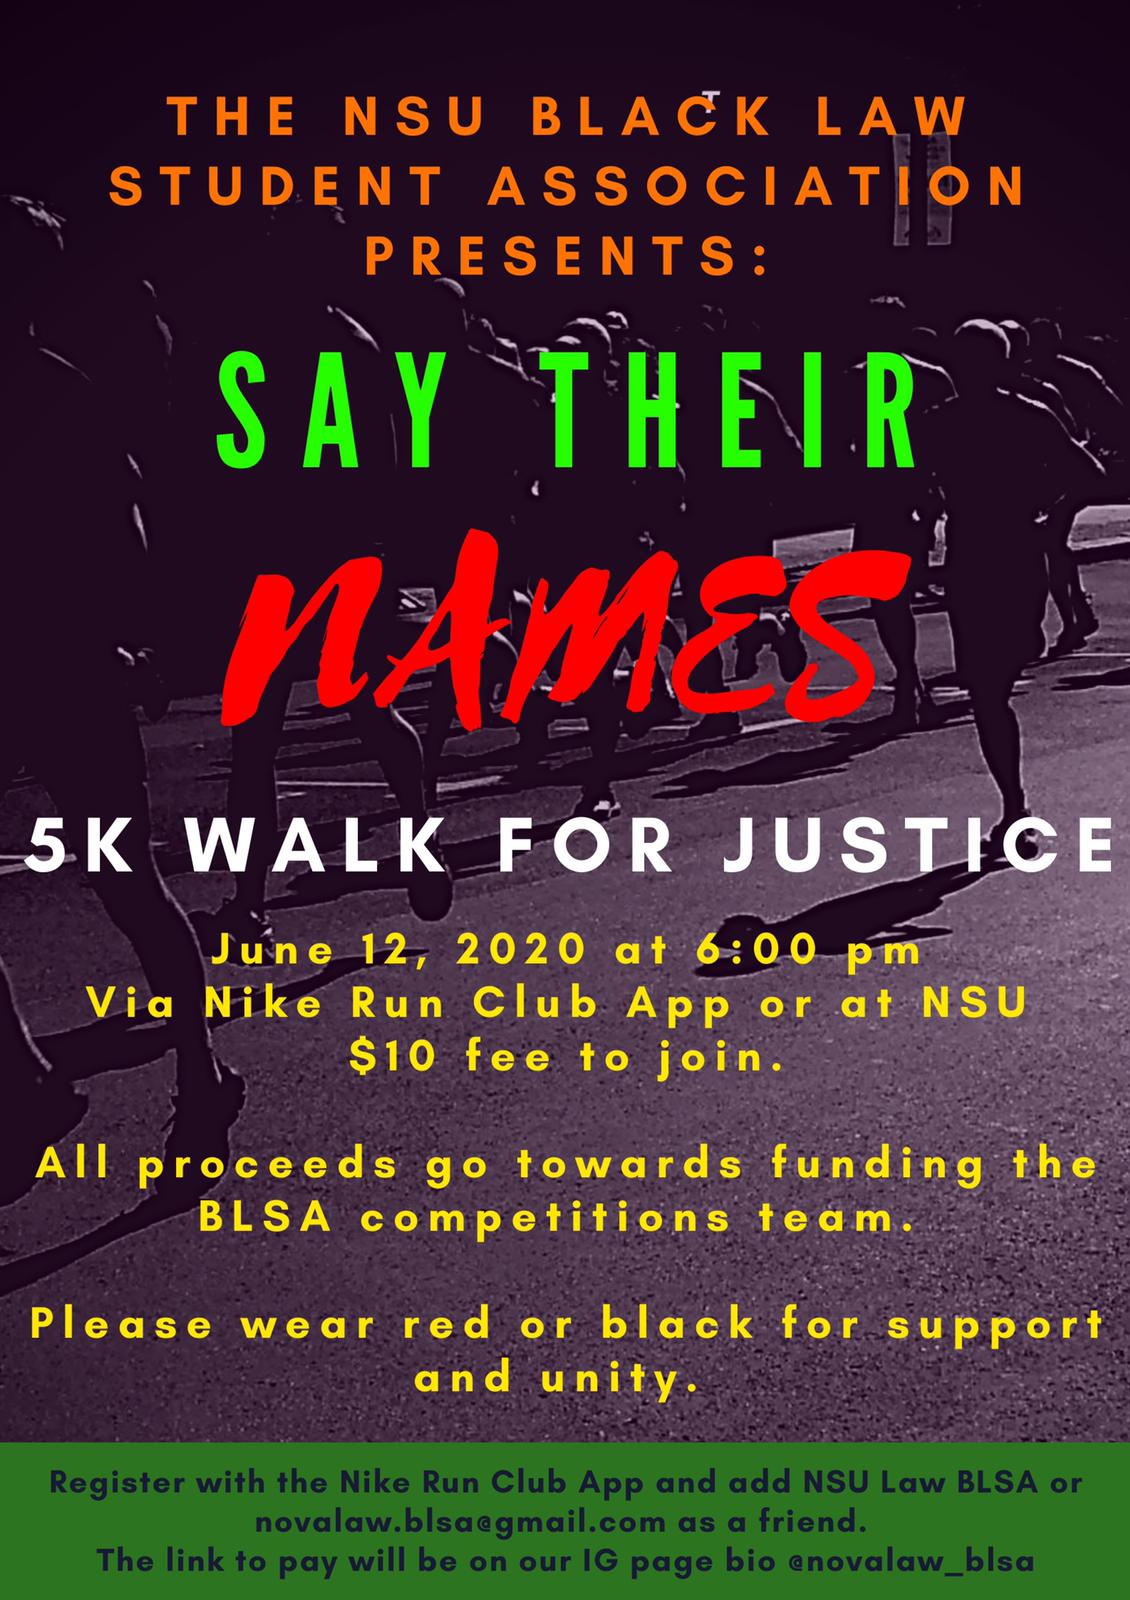 Promotional graphic for Say Their Names 5k Walk For Justice by the NSU Black Law Student Association